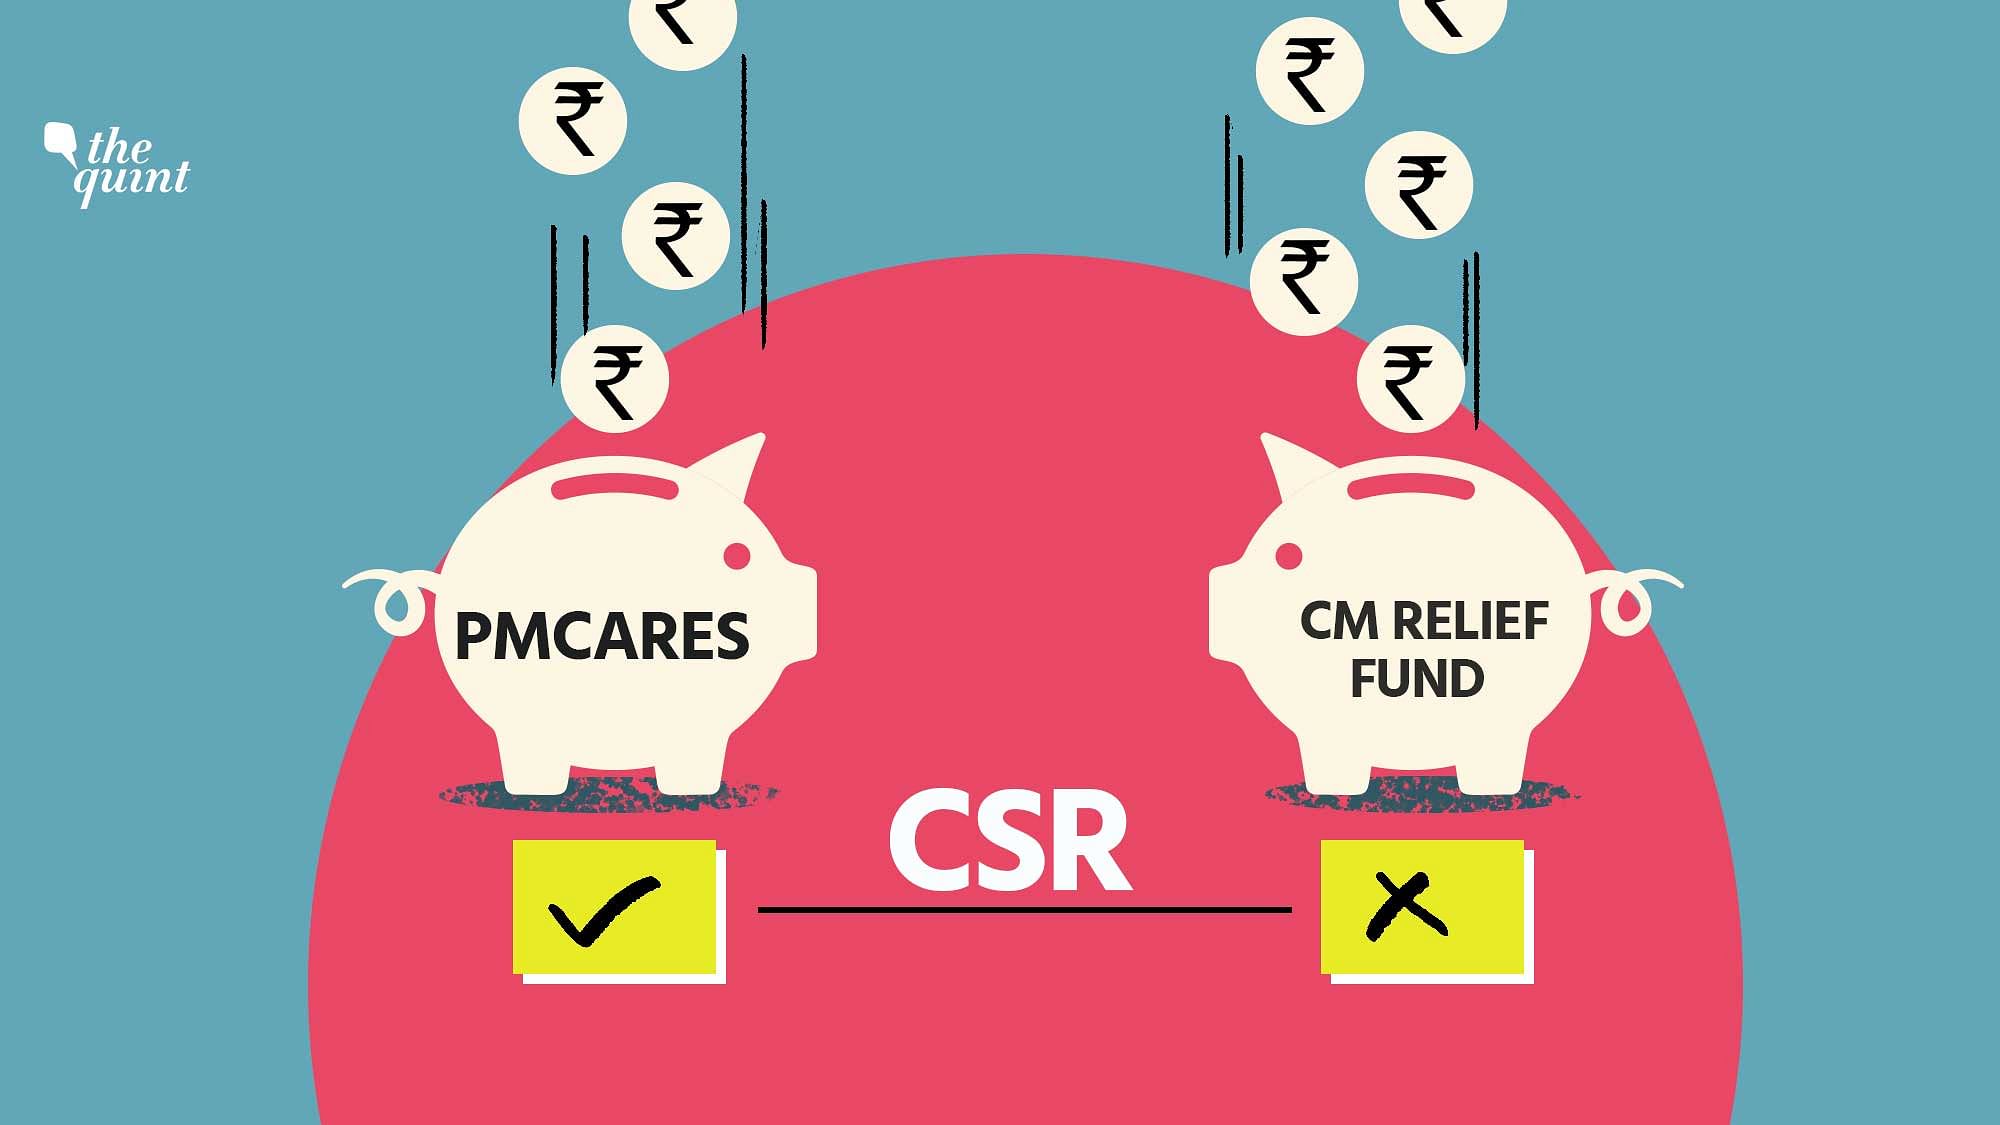 Corporate donations to the PMCARES Fund are being considered as CSR expenditure, but not those to the CM Relief Funds, as the latter are not covered by the Companies Act.